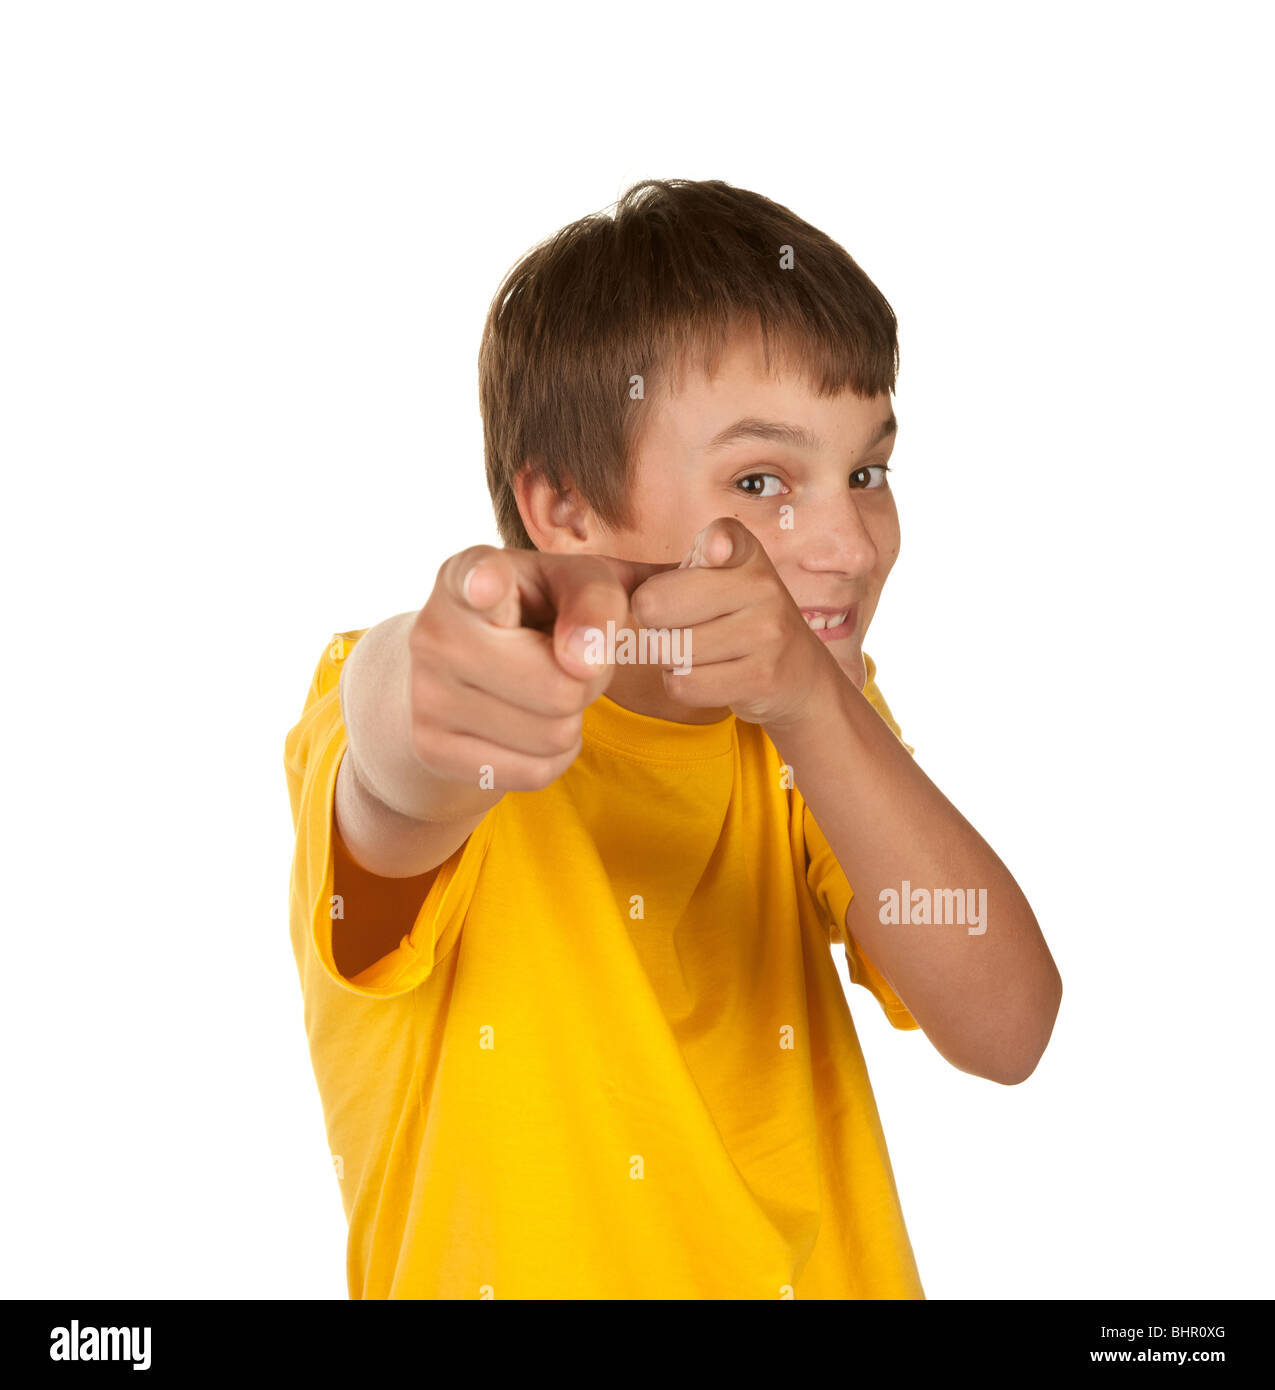 pointing to you clipart